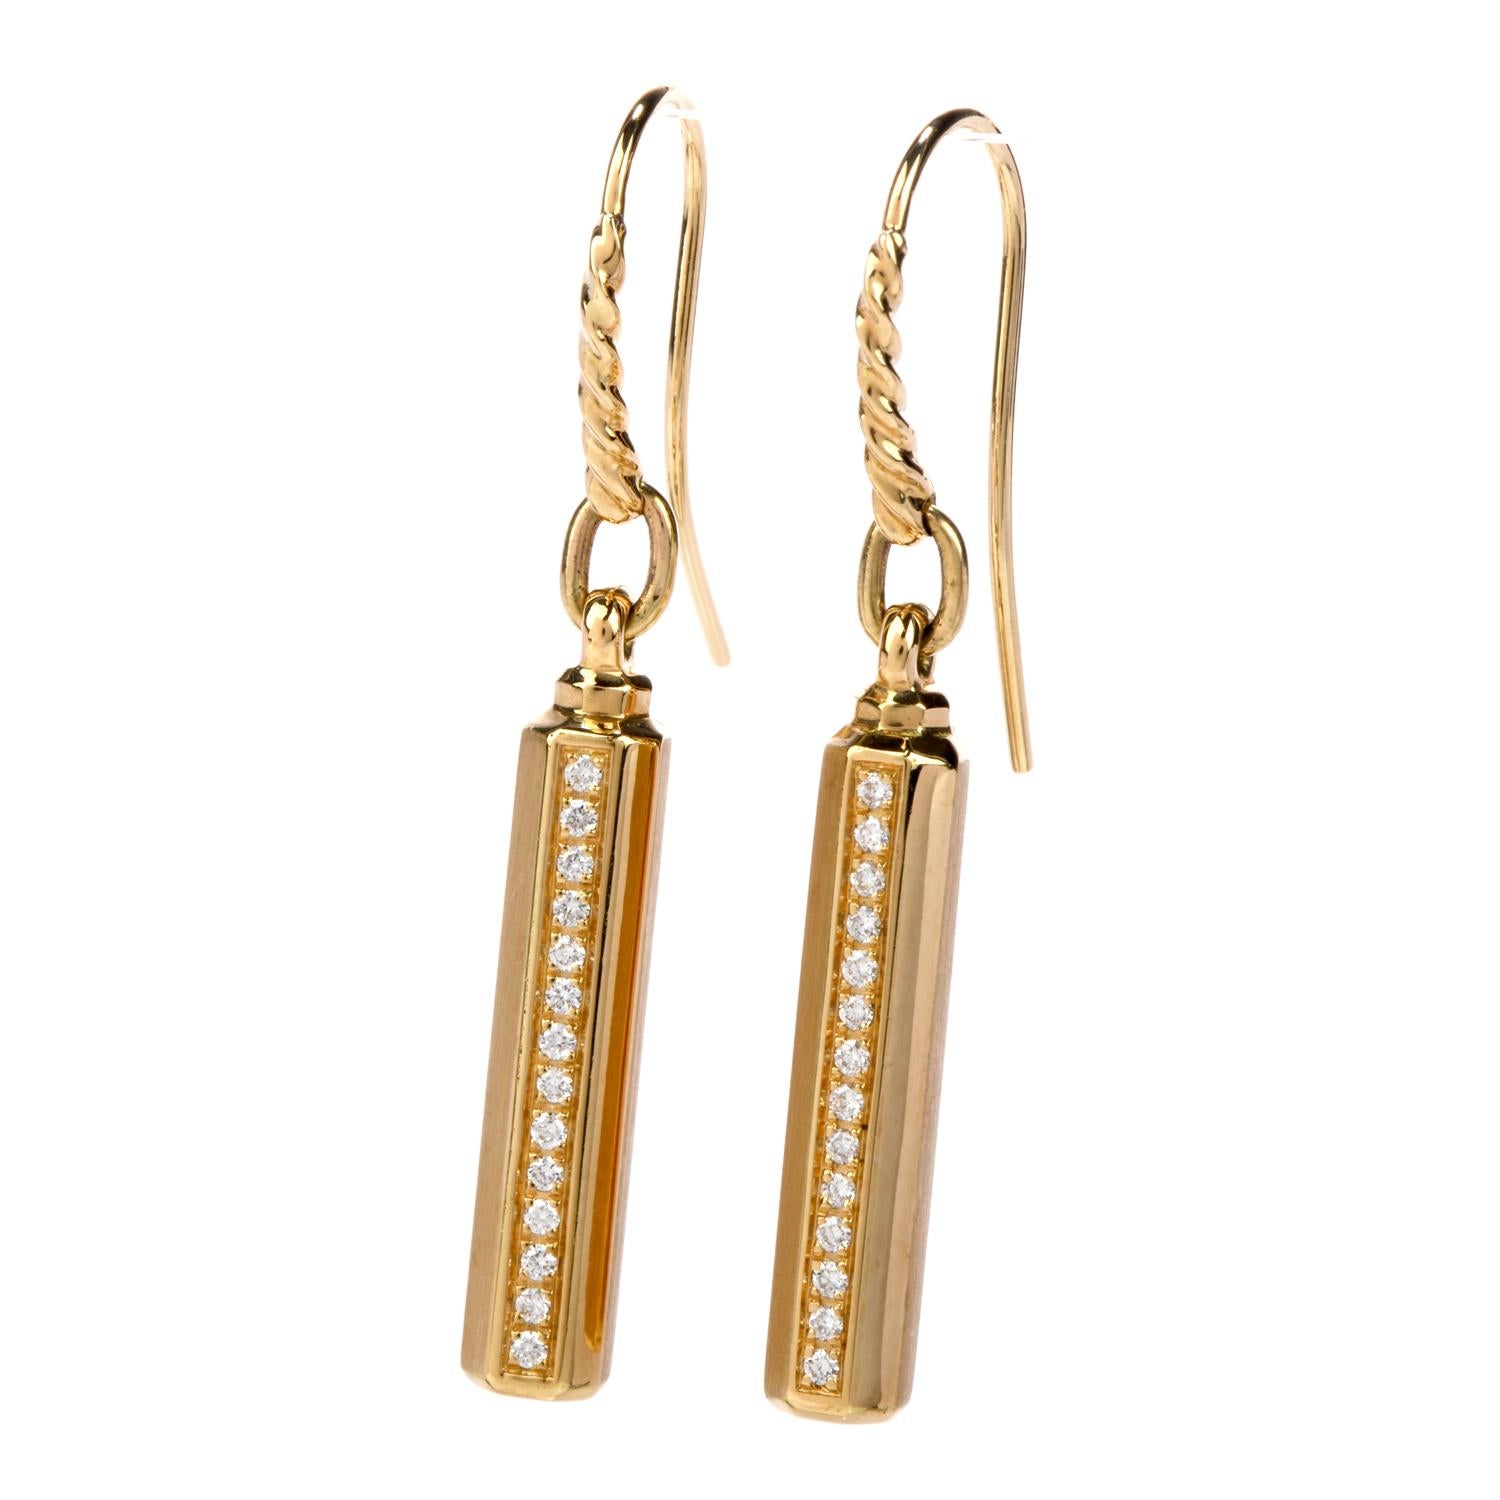 Dress your ears tastefully with these beautiful David Yurman Diamond 18K Gold Barrels Drop Hook Earrings.  These earrings are part of the desirable Barrels Collection.  The prismatic design of these 18K Gold drop earrings hold approx. 28 round cut